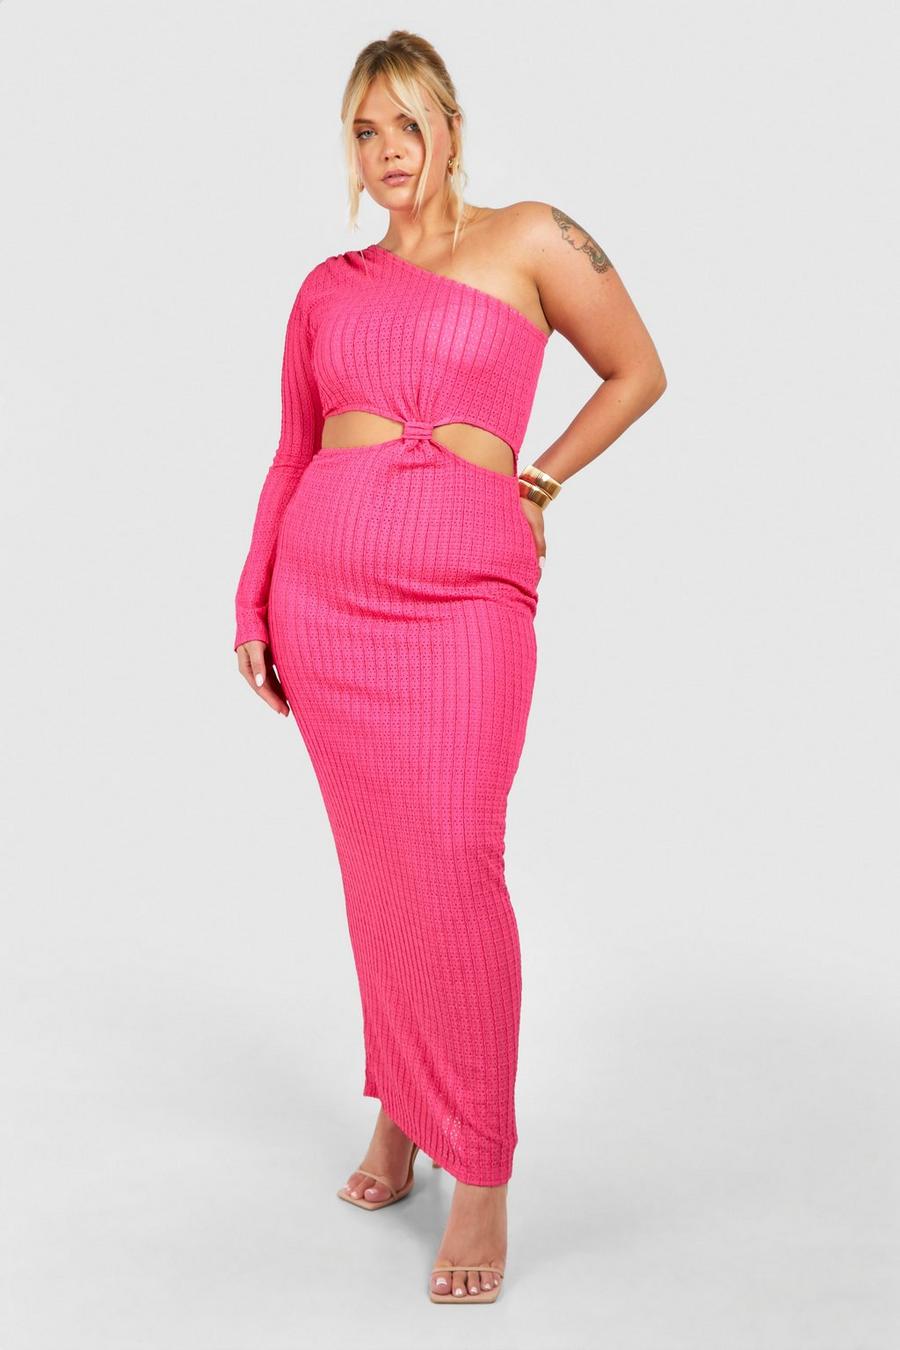 Plus Textured Cut Out One Shoulder Maxi Dress , Hot pink